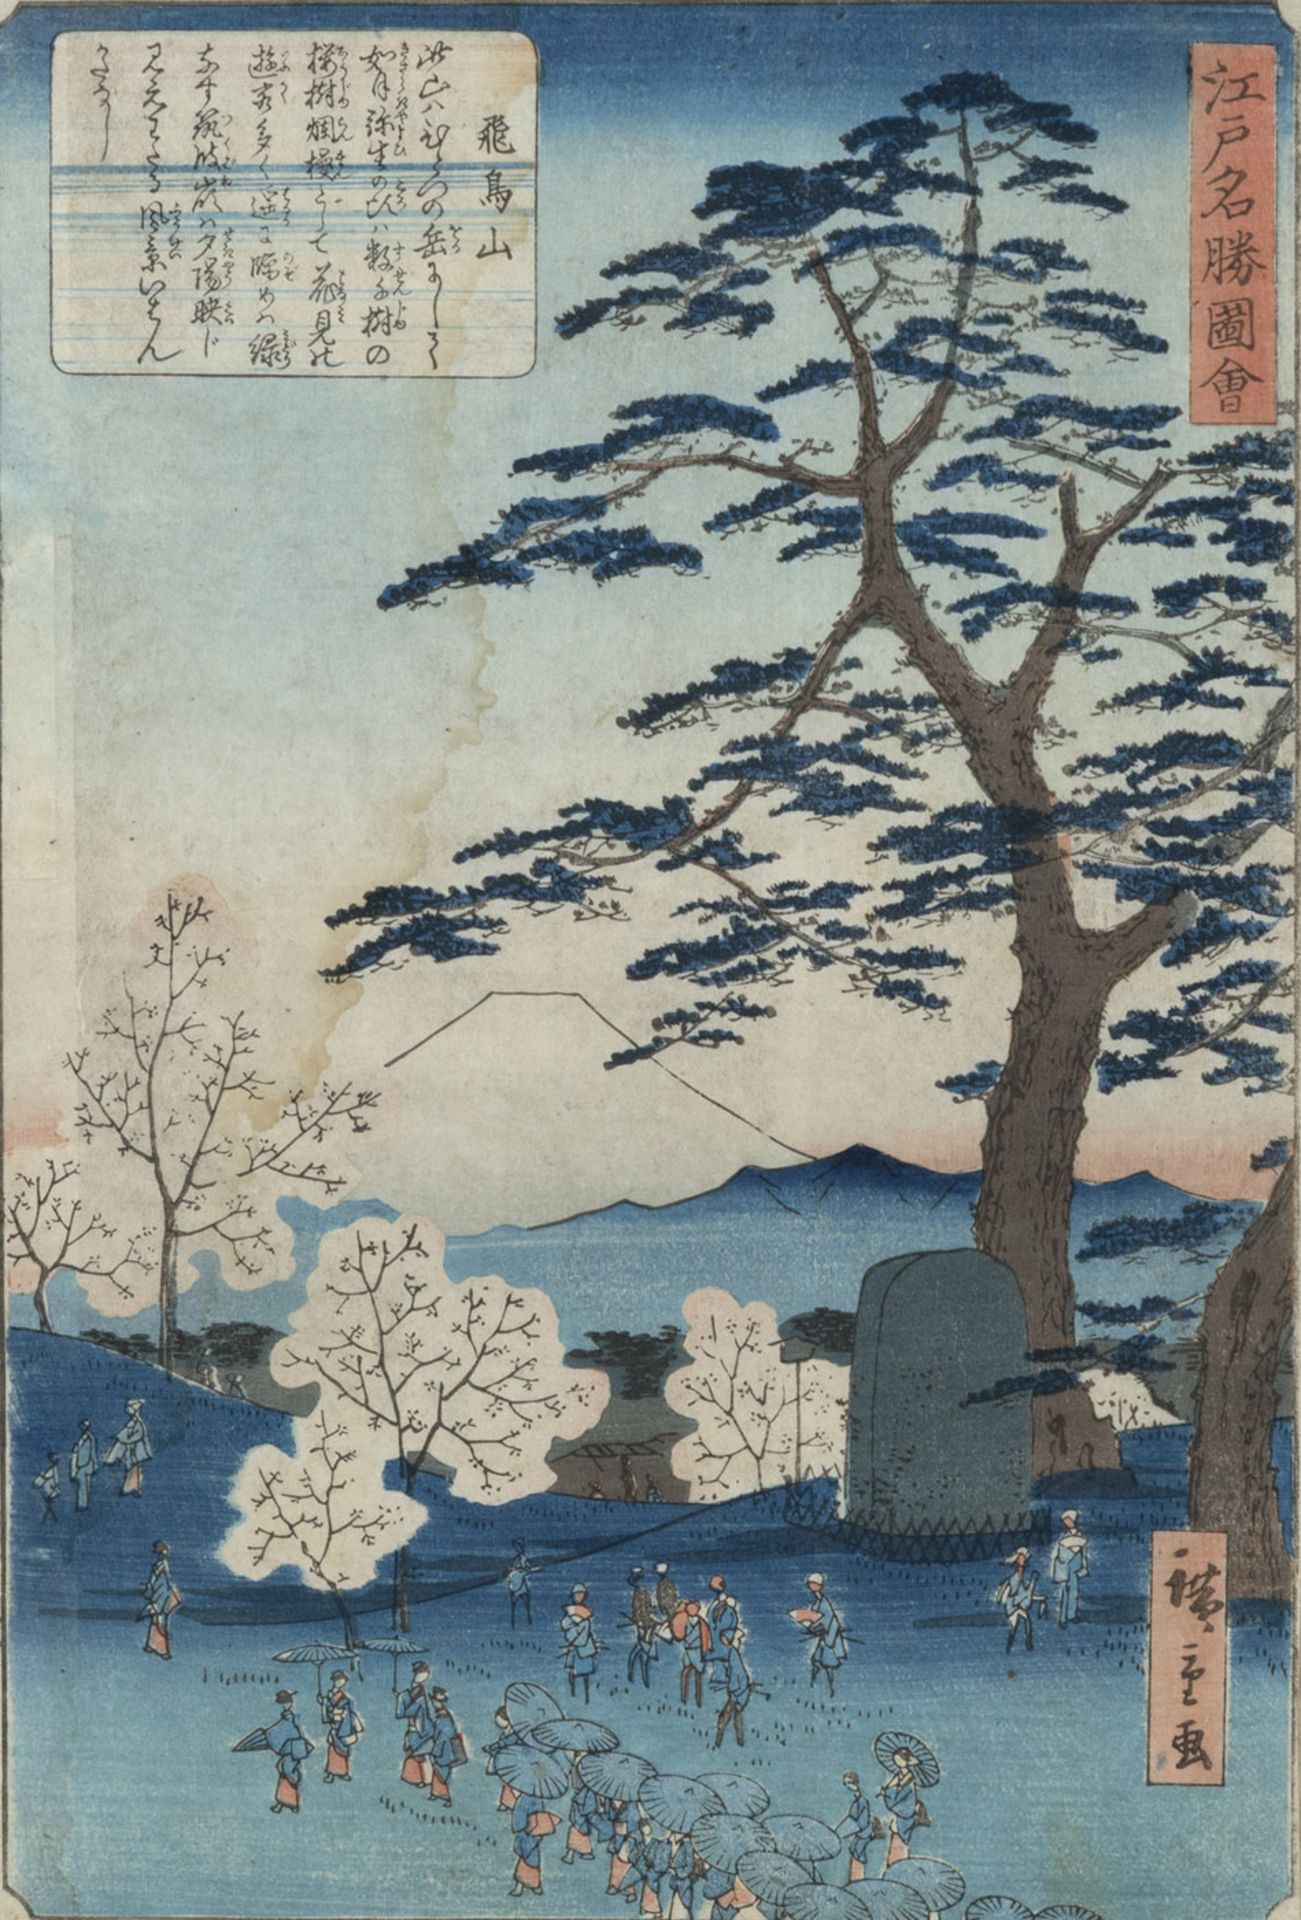 HIROSHIGE II (1826-1869) - REPRINT OF 'ASUKA HILL' FROM THE SERIES 'FAMOUS VIEWS IN EDO'